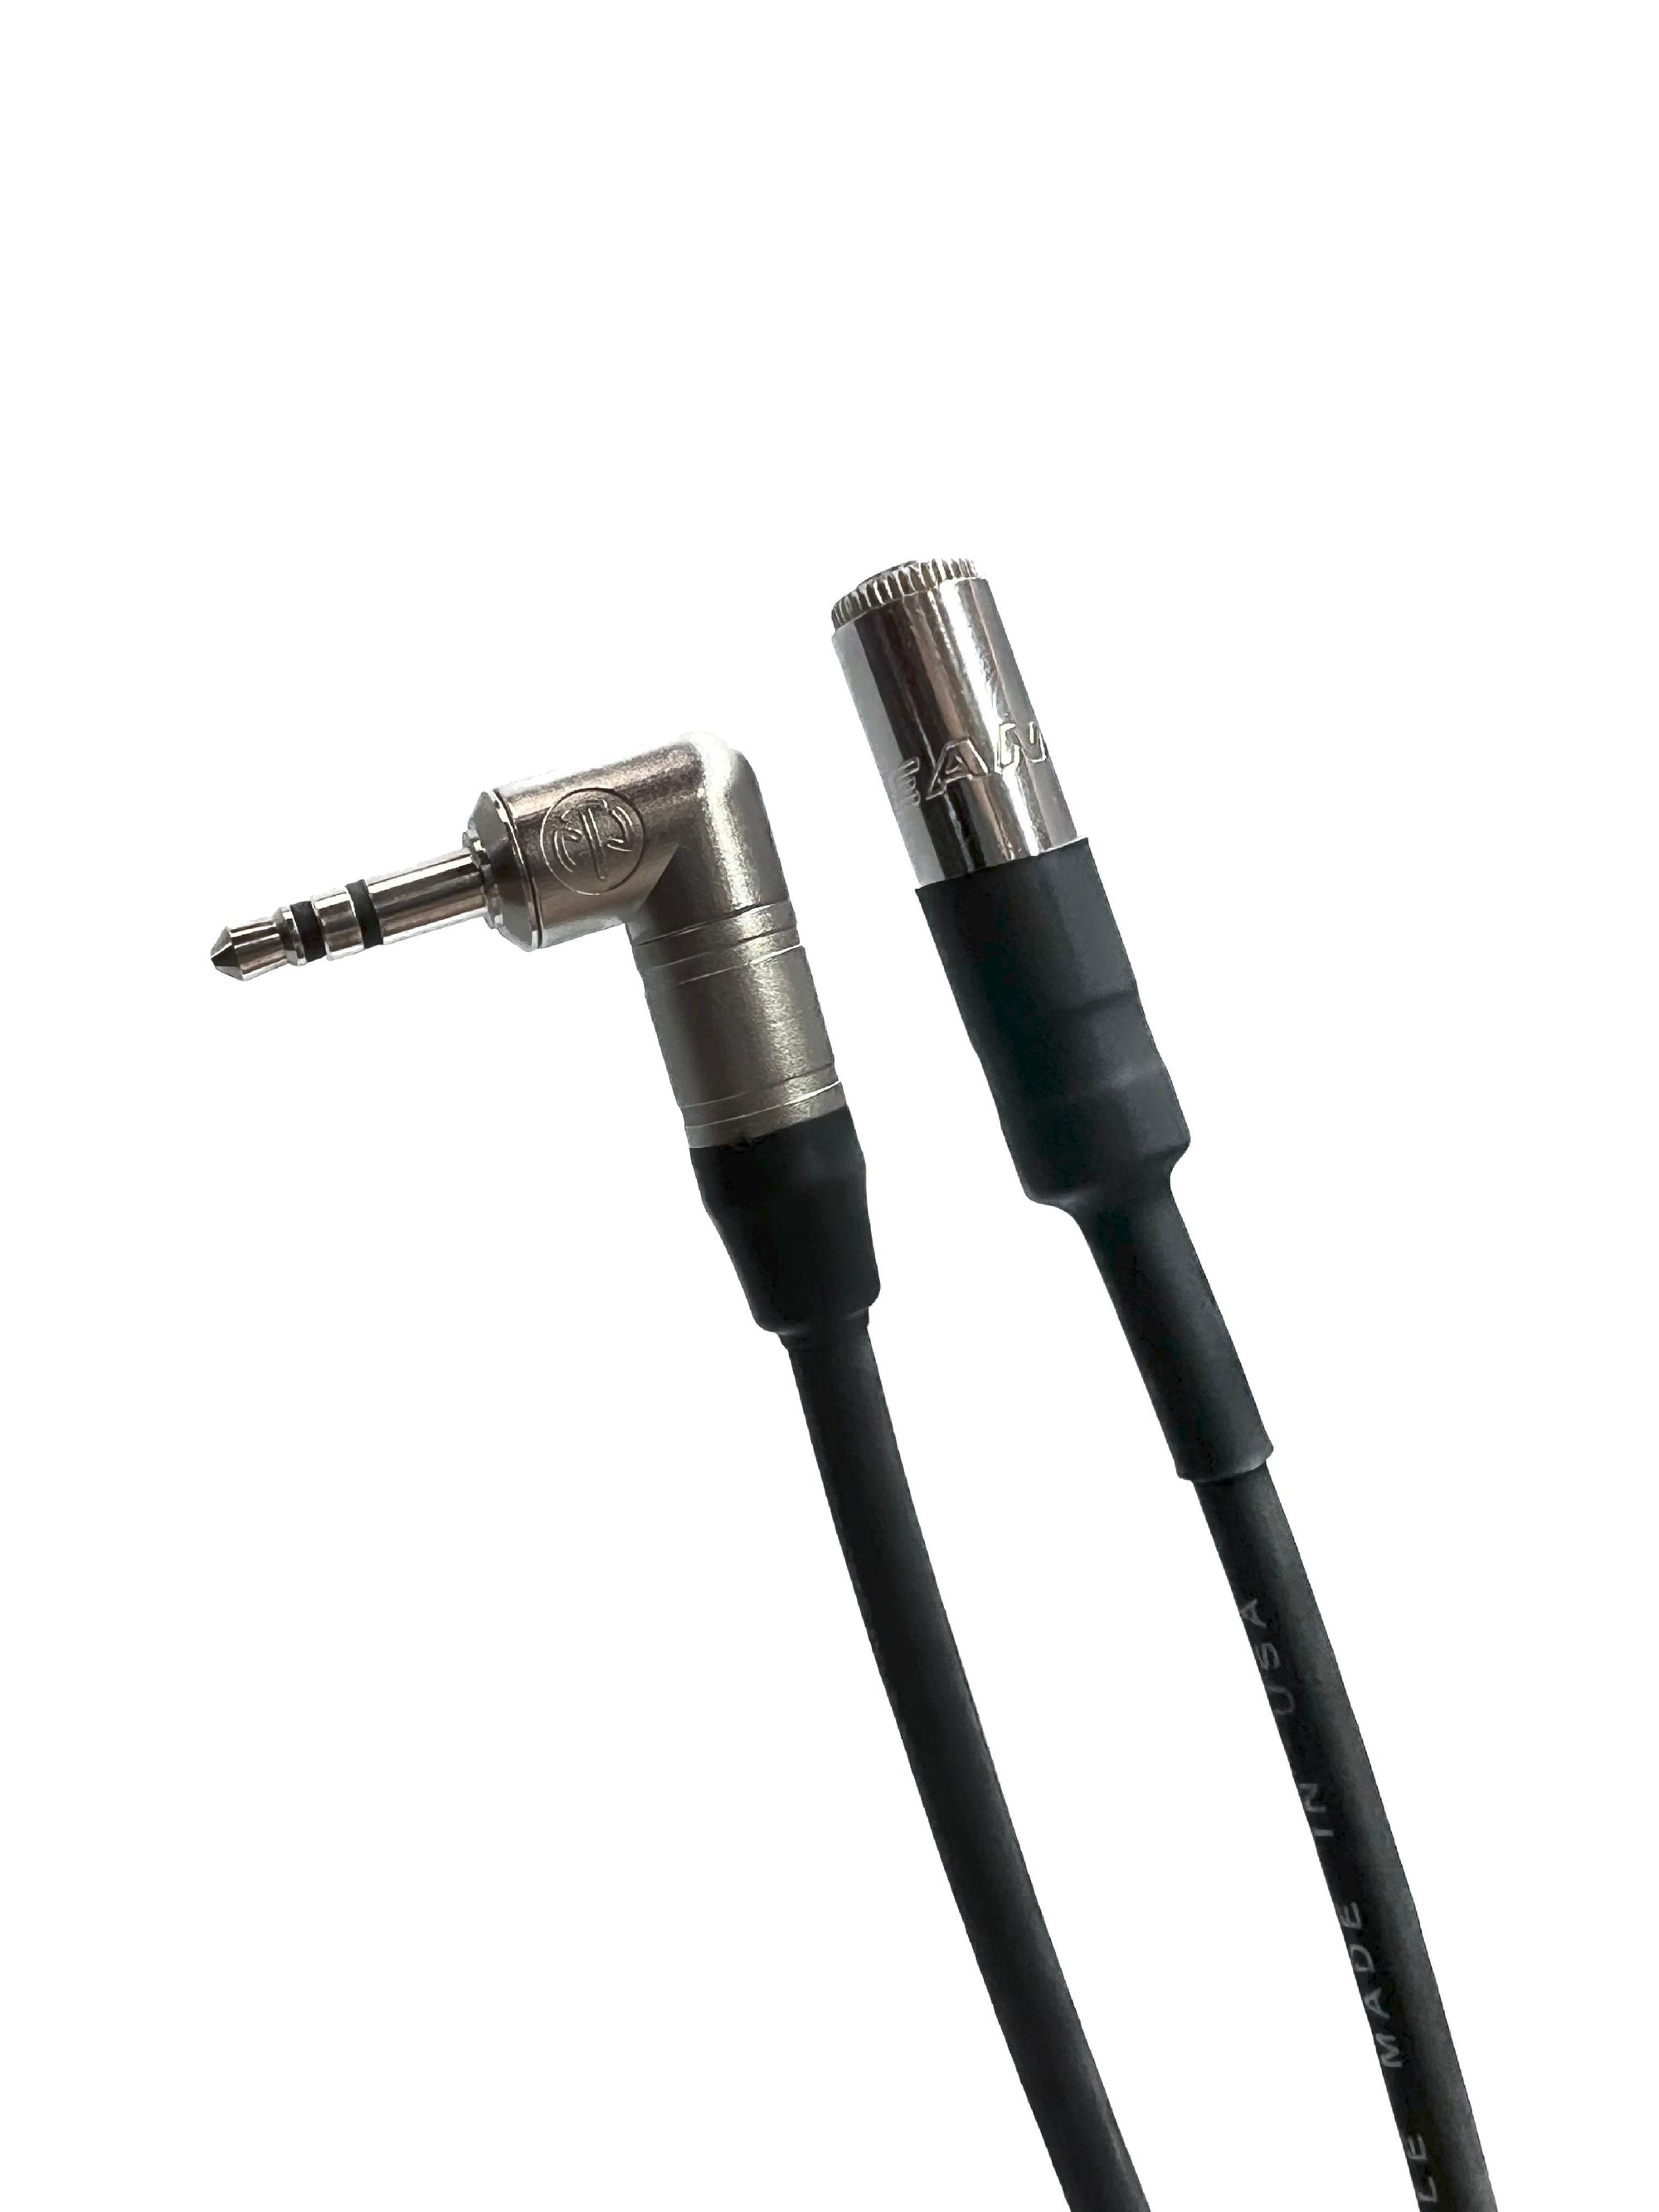 3.5mm 1/8-Inch Male Mini Plug Stereo Audio Cable (12ft)